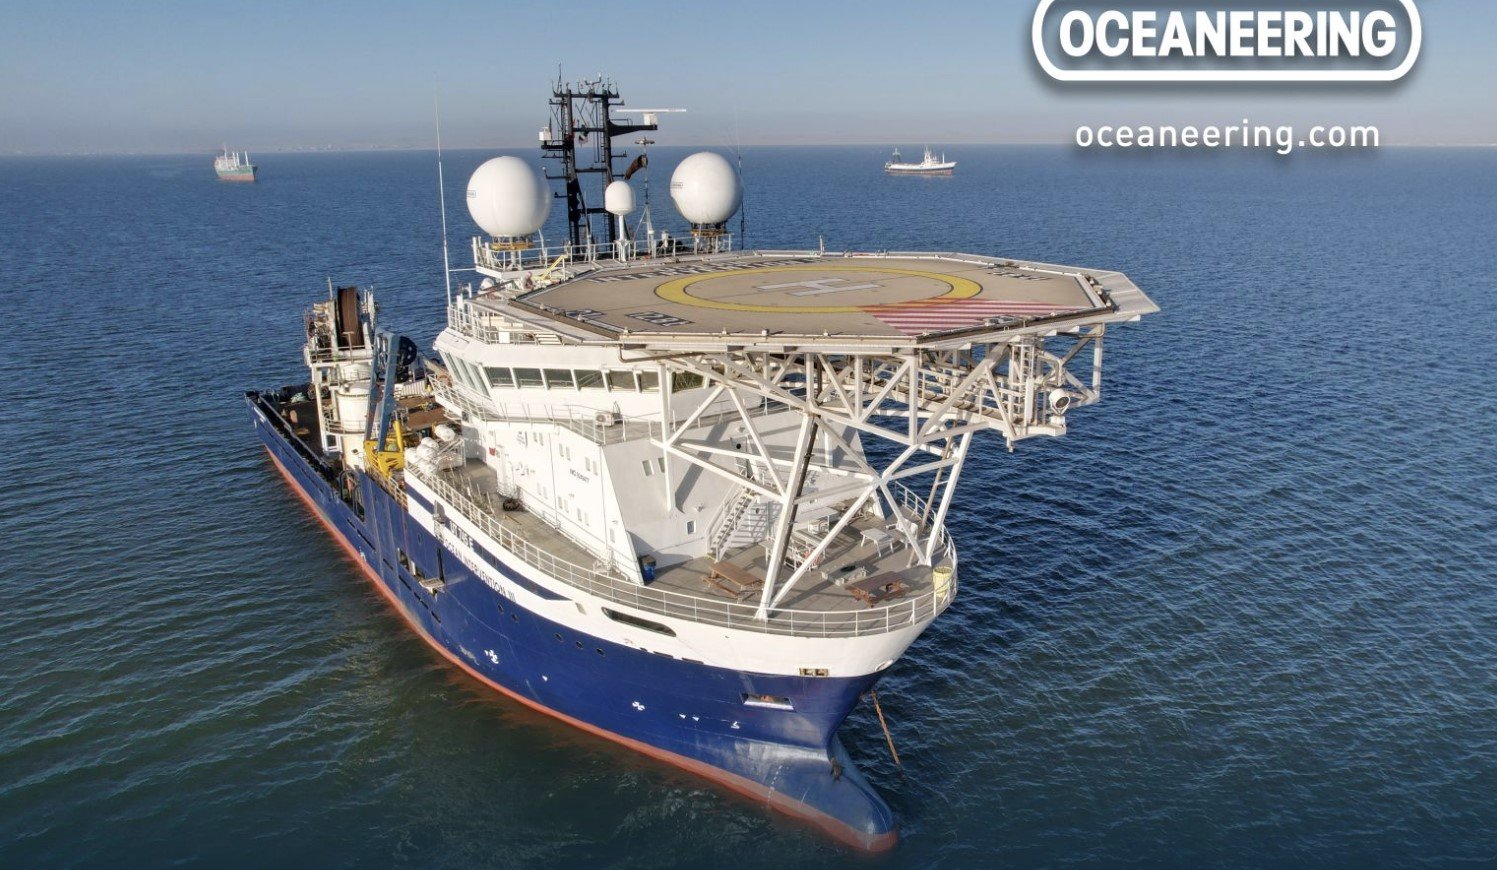 More than $100 million in two new contracts for Oceaneering